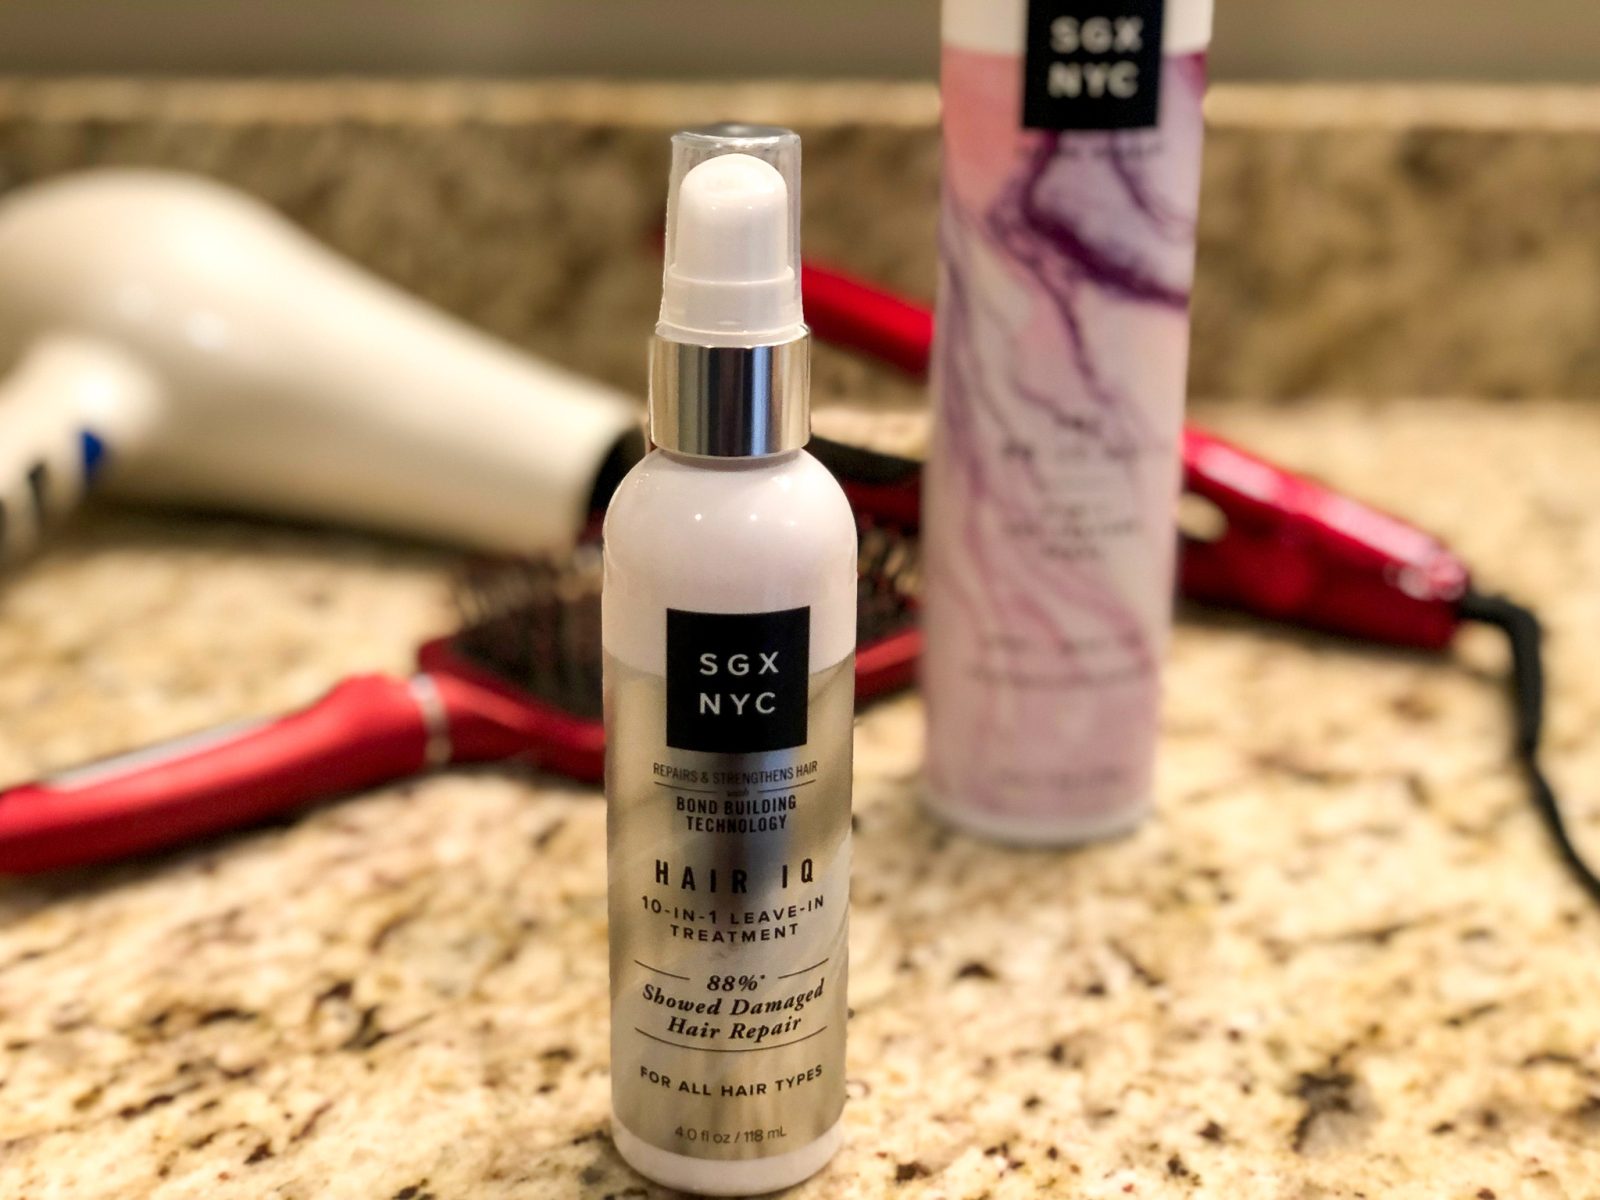 Don’t Miss Your Chance To Grab A Deal On Your Favorite SGX NYC Haircare Products – Save Now At Publix